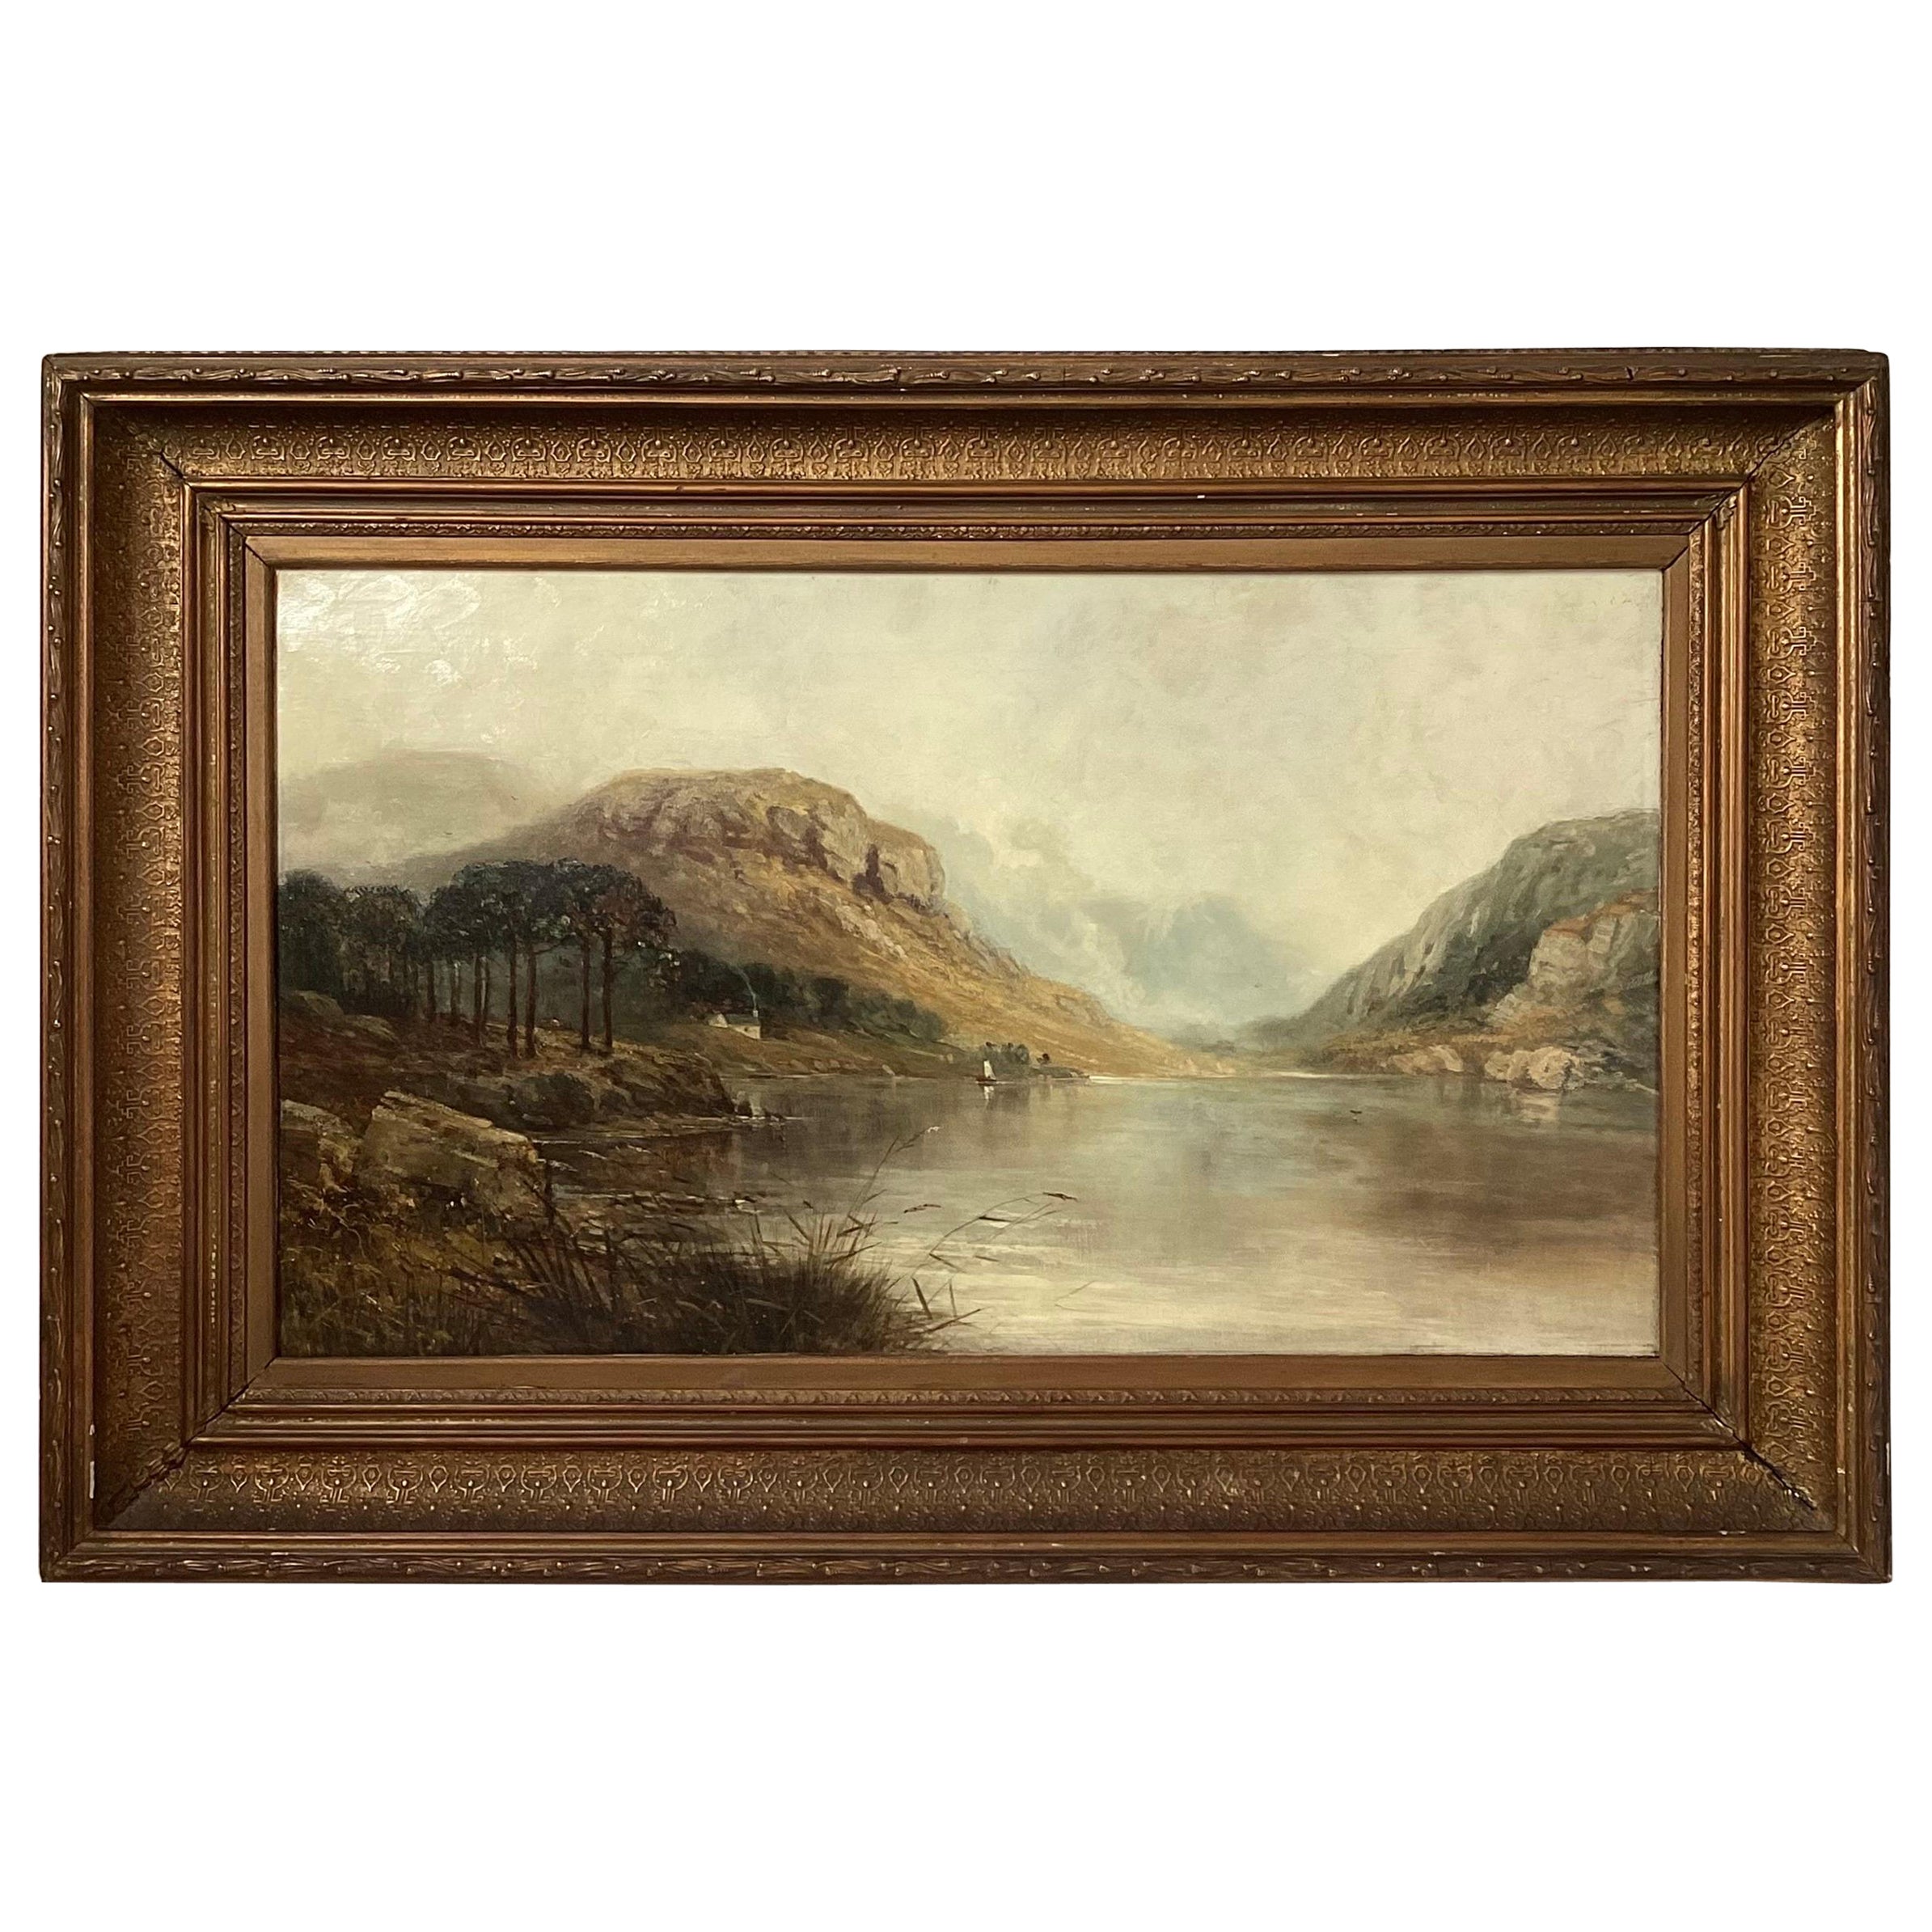 Large and Stunning Oil on Canvas Landscape in Original Giltwood Frame